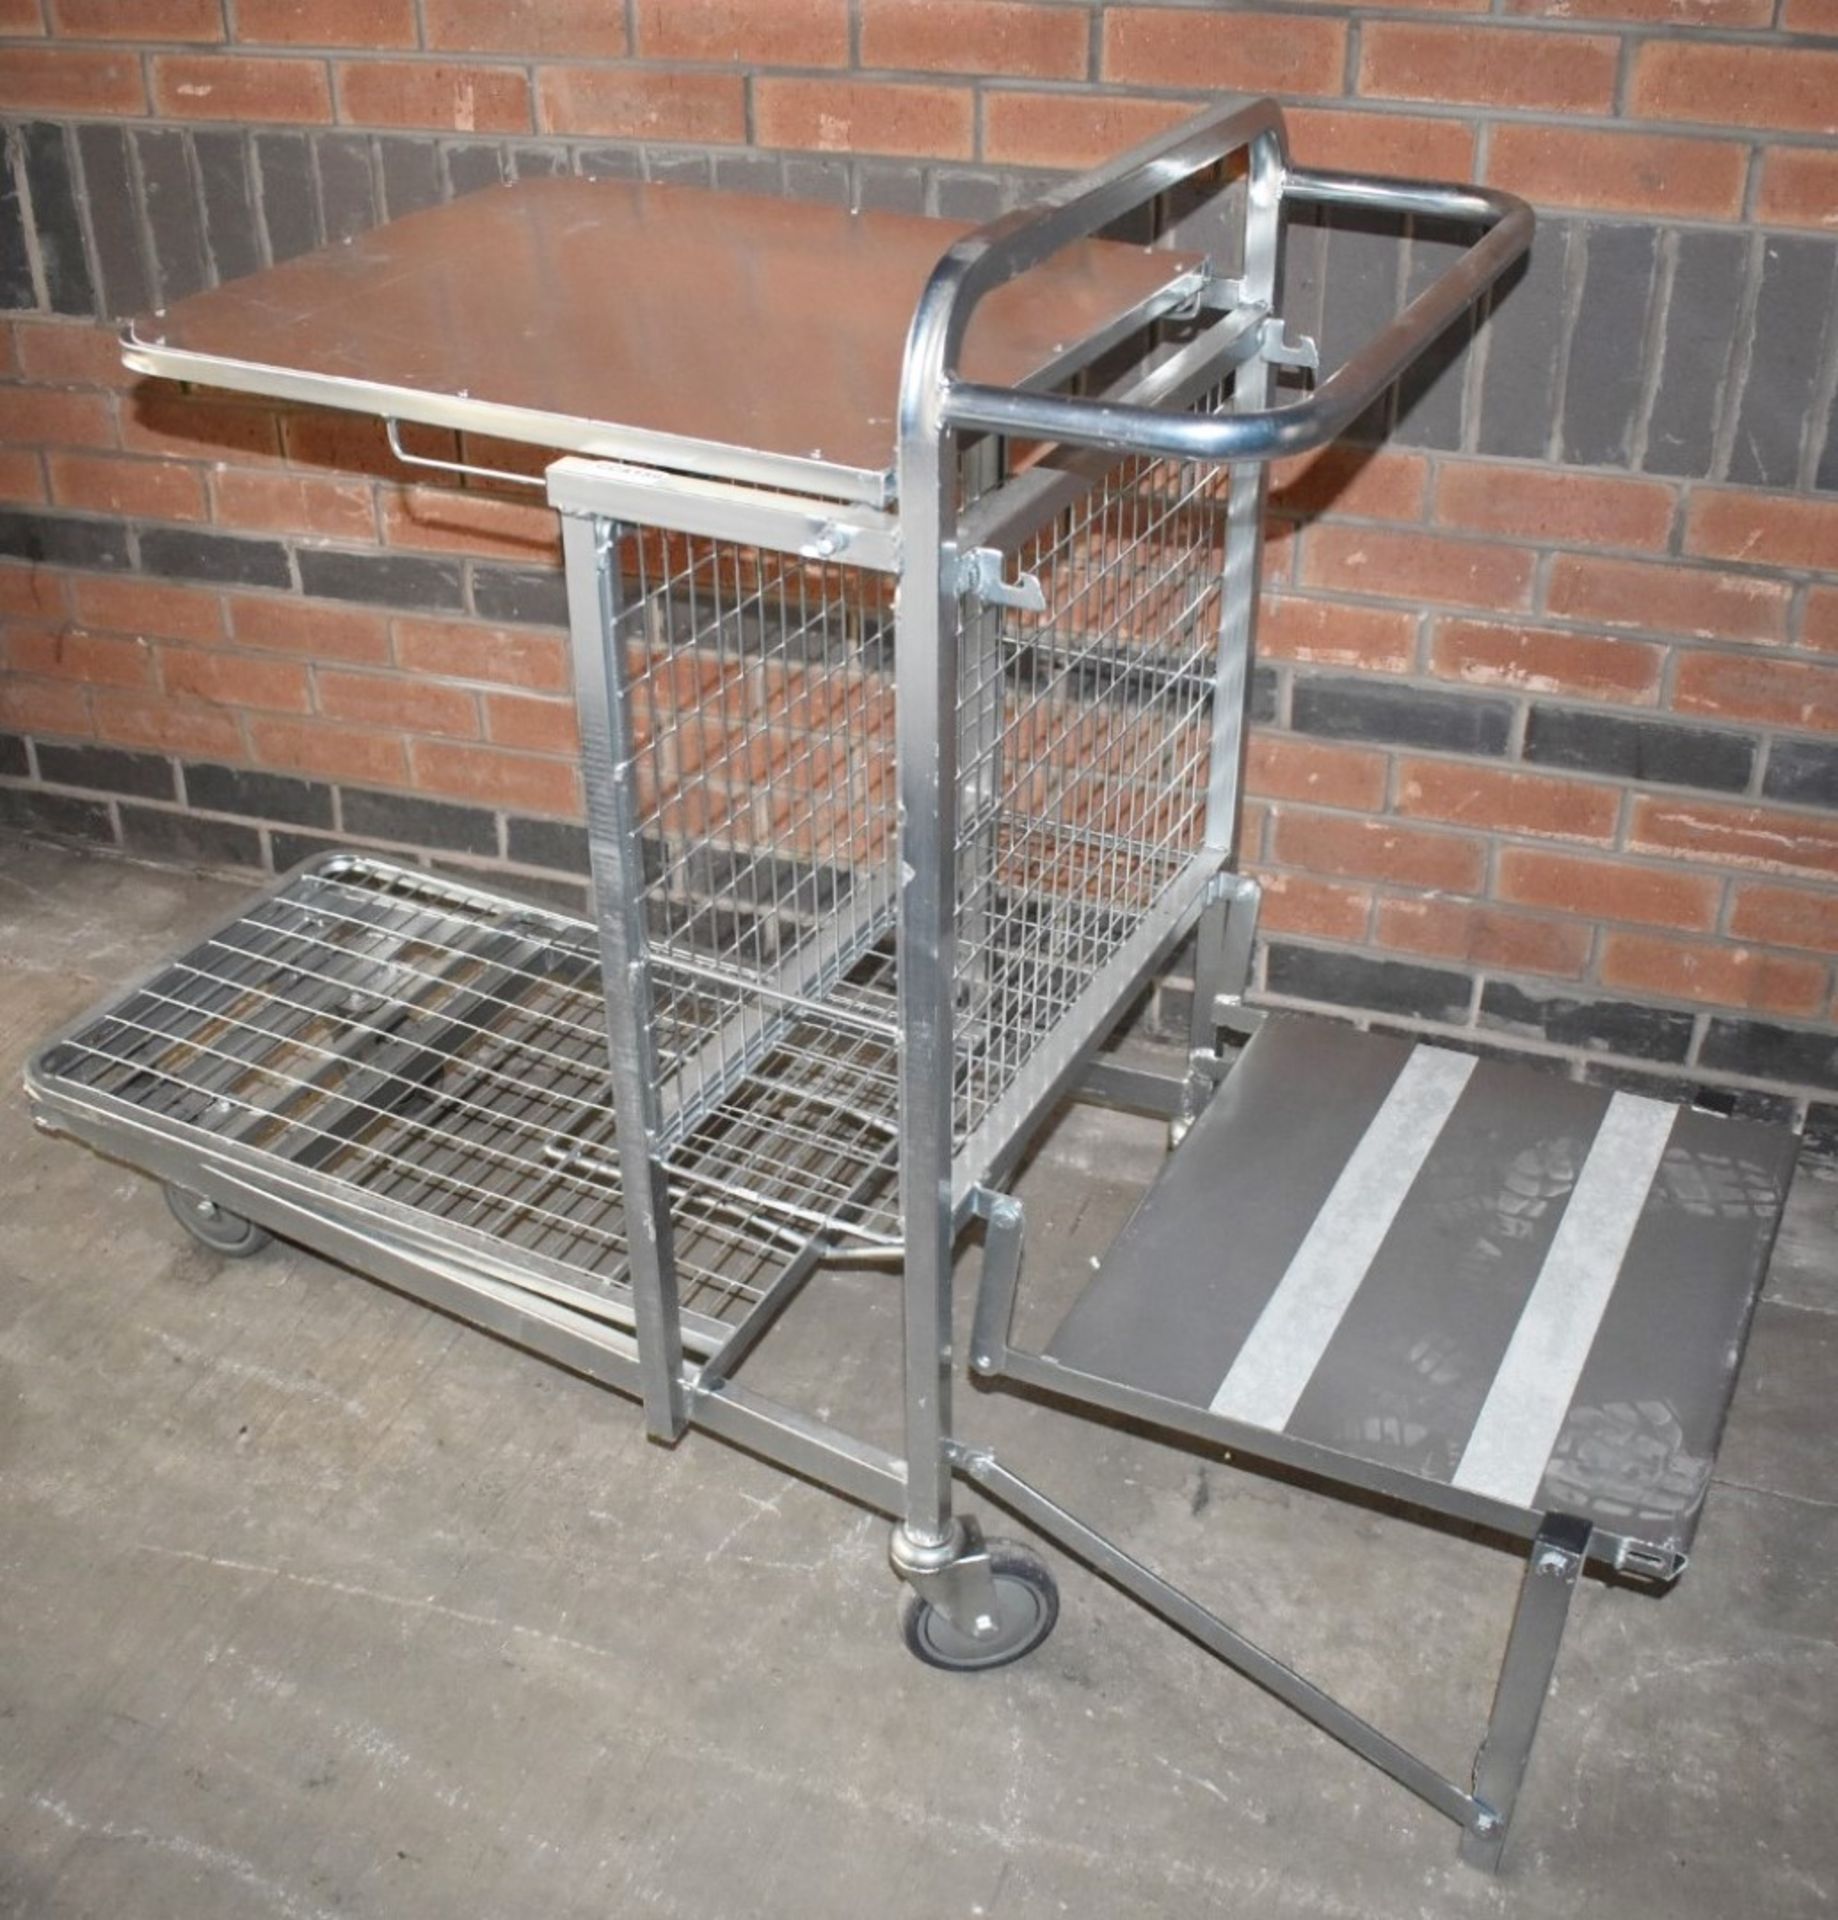 1 x Supermarket Retail Merchandising Trolley With Pull Out Step and Folding Shelf - Dimensions: - Image 8 of 12